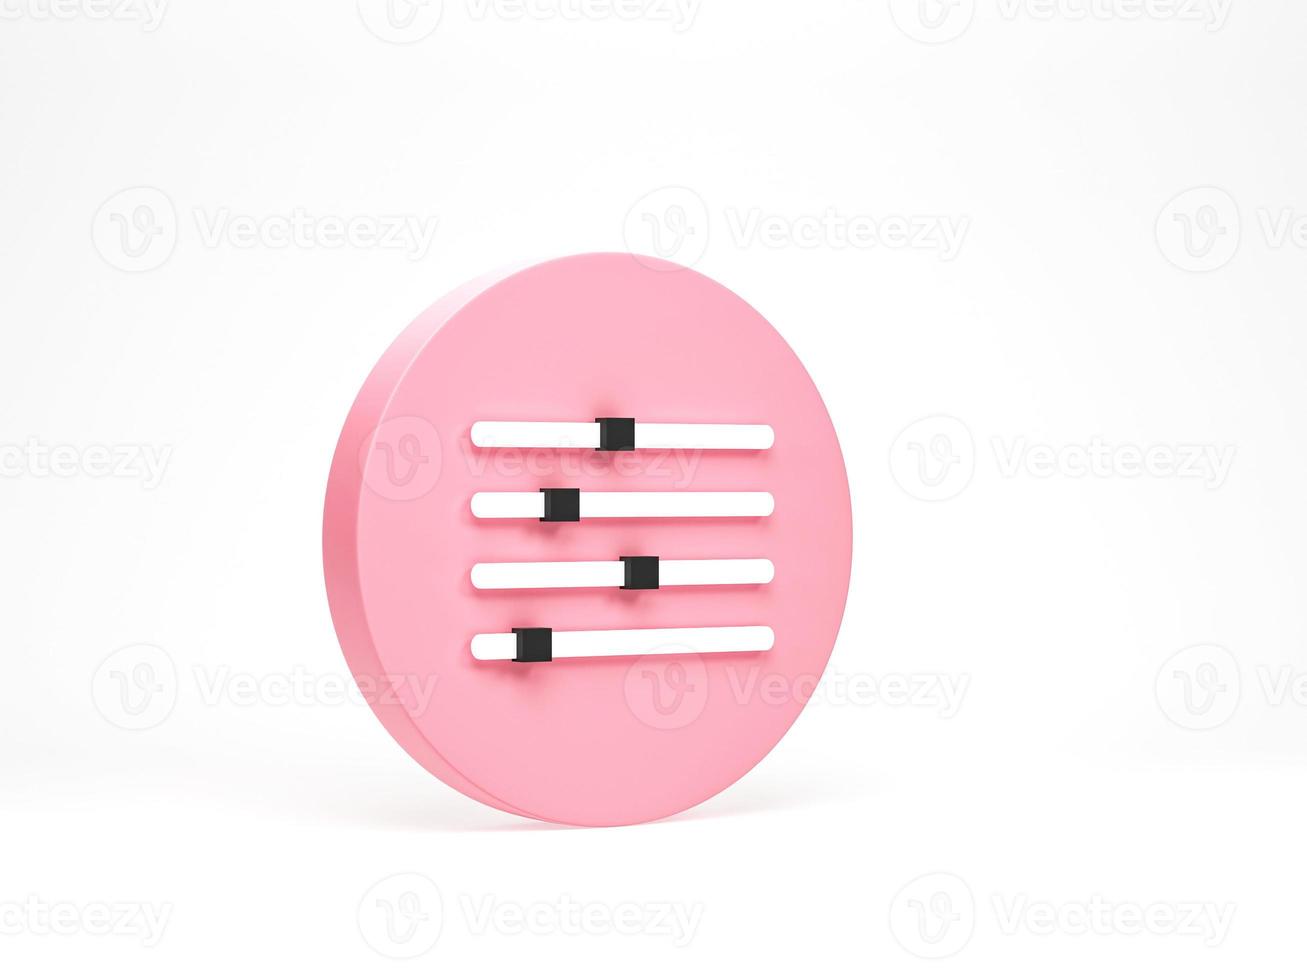 3D rendering, 3D illustration. Adjustment button icon design. Music adjustment icon isolated on white background. photo